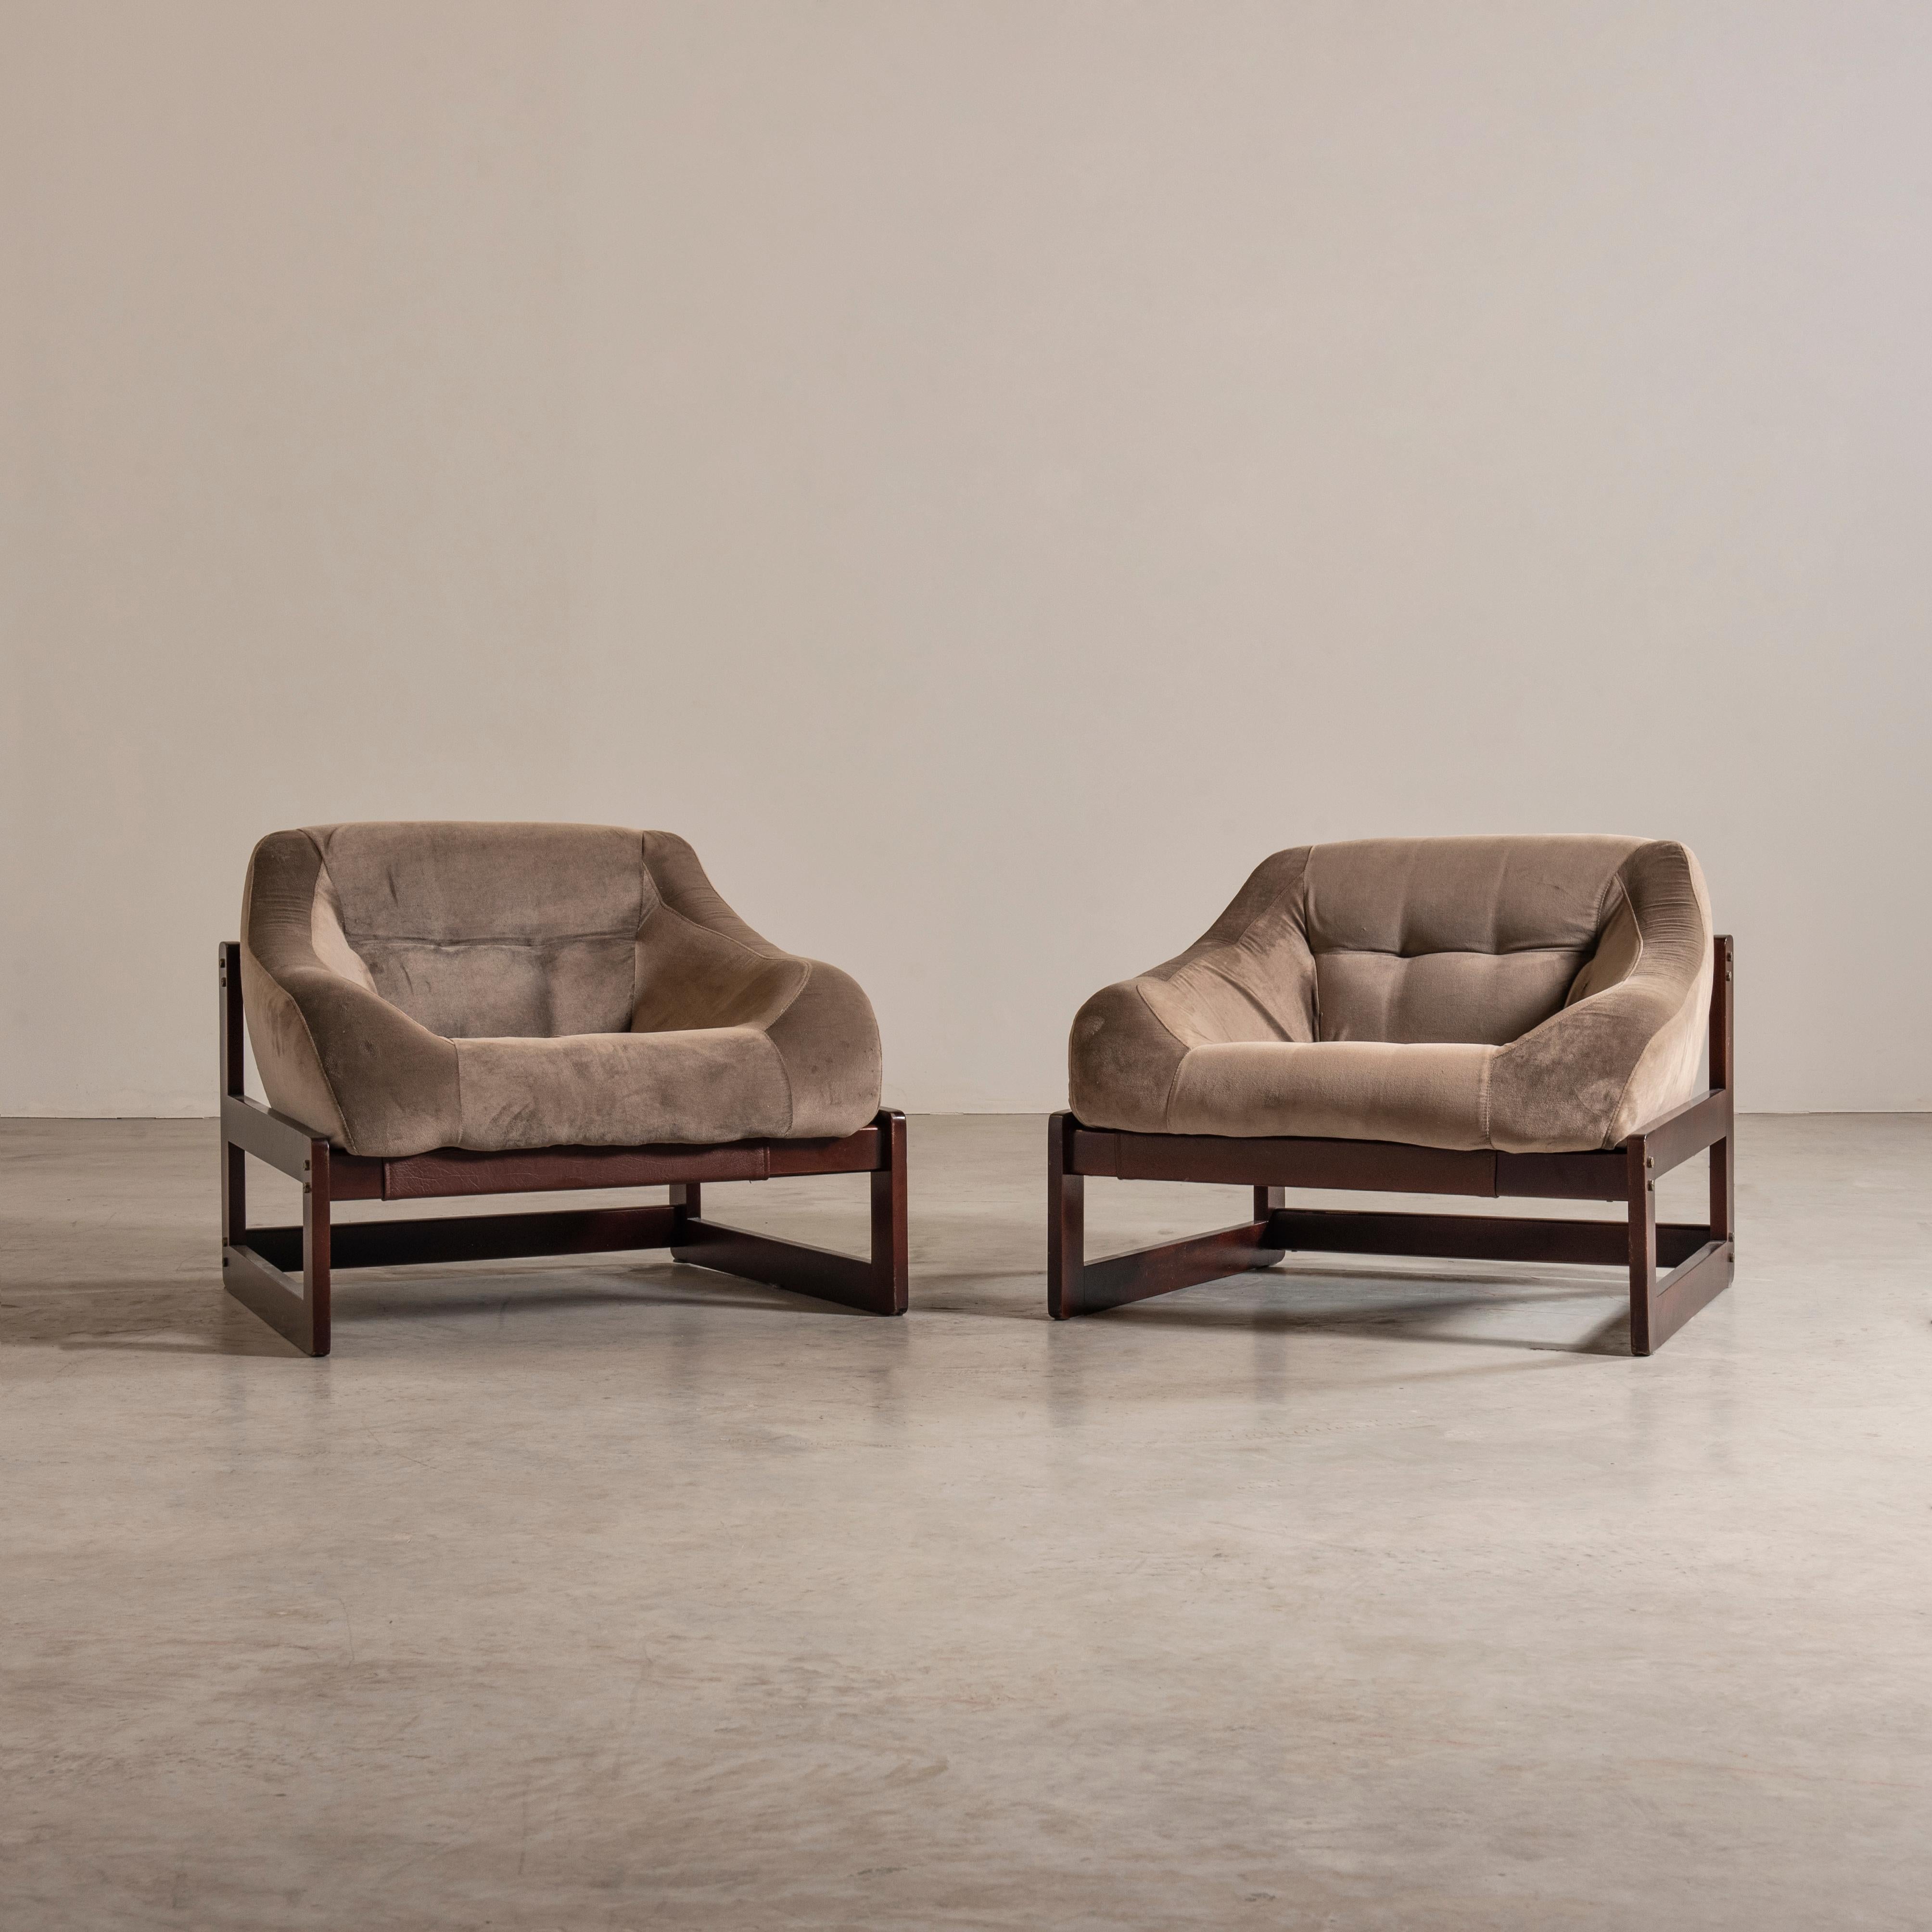 This pair of armchairs, created in the 1970s by the designer Percival Lafer is extremely comfortable and is capable of bringing a sense of personality and style to any decor. The structure is made of Jatoba wood and seat and backrest in single,